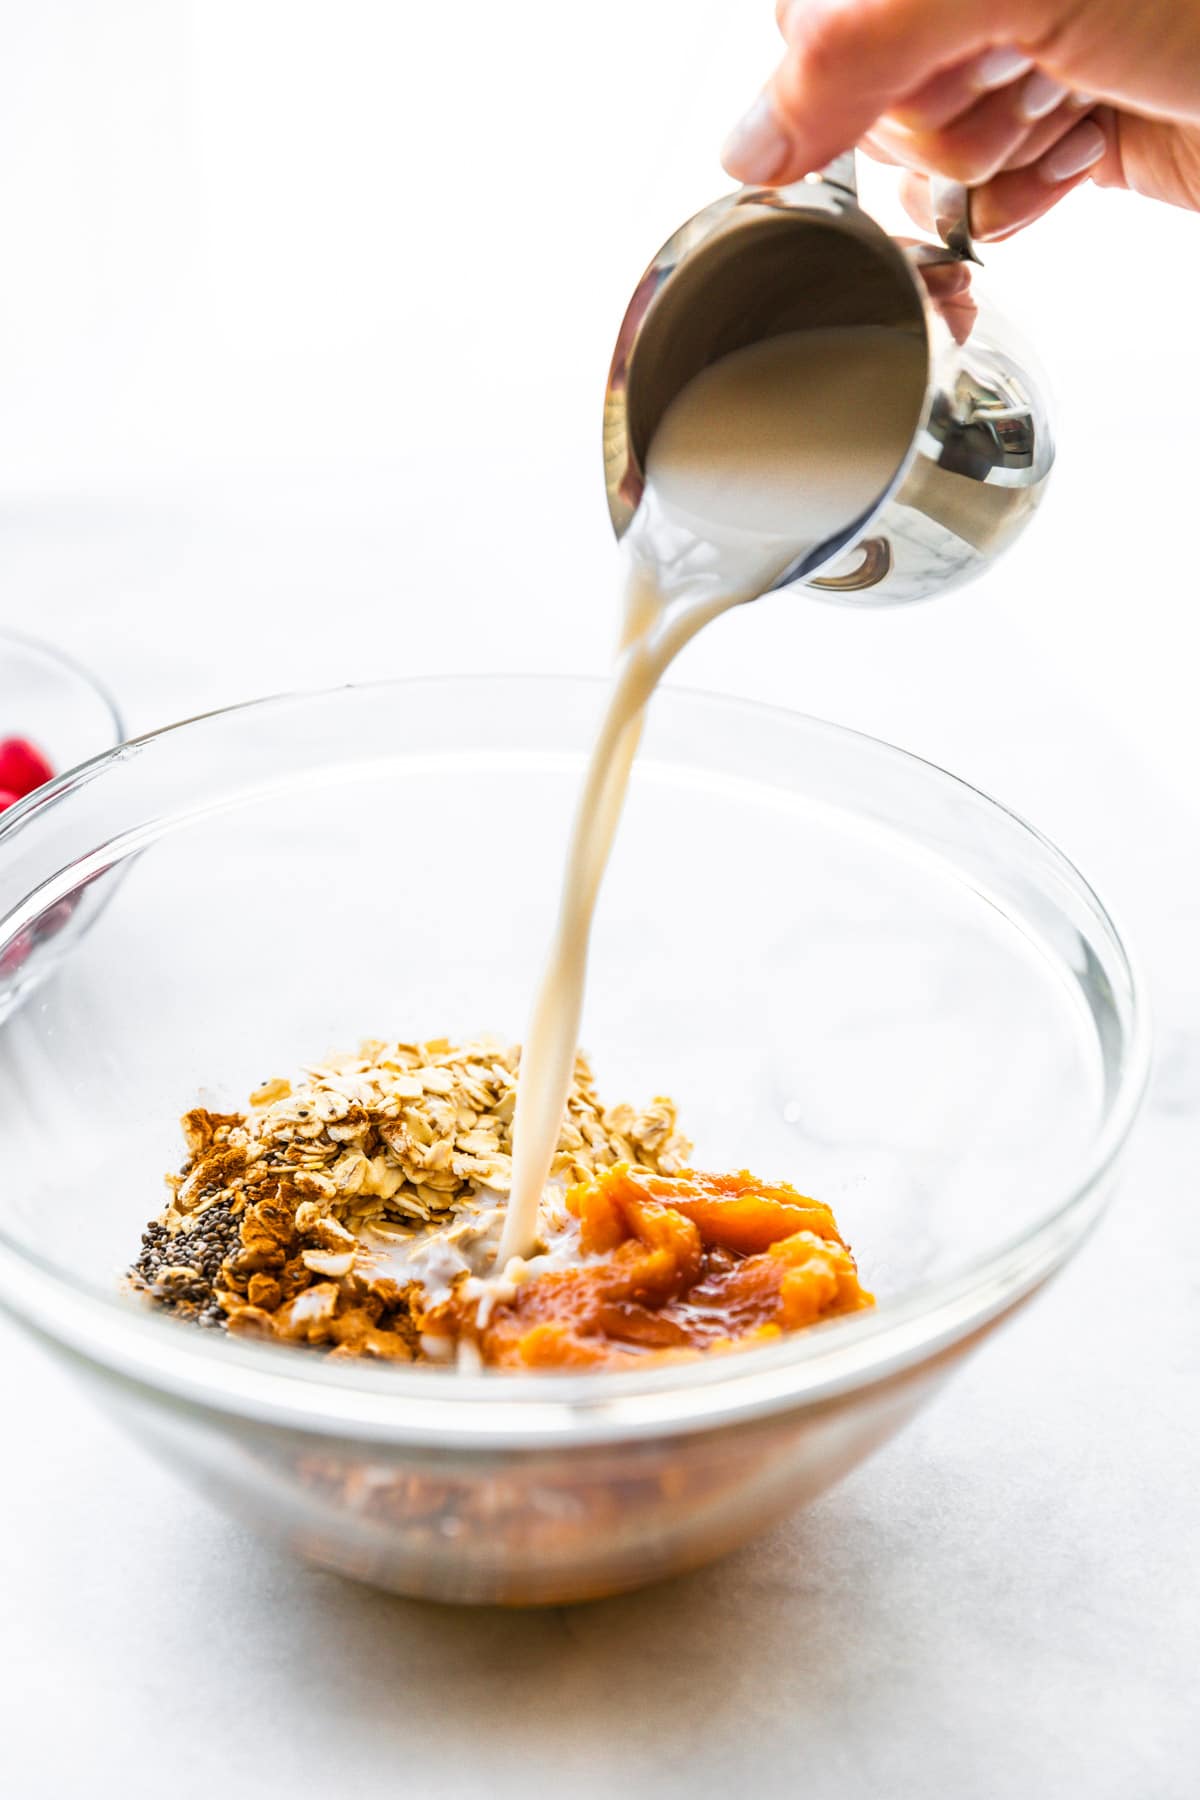 A small silver carafe of condensed milk being poured into a glass mixing bowl filled with the ingredients for vegan pumpkin overnight oats.